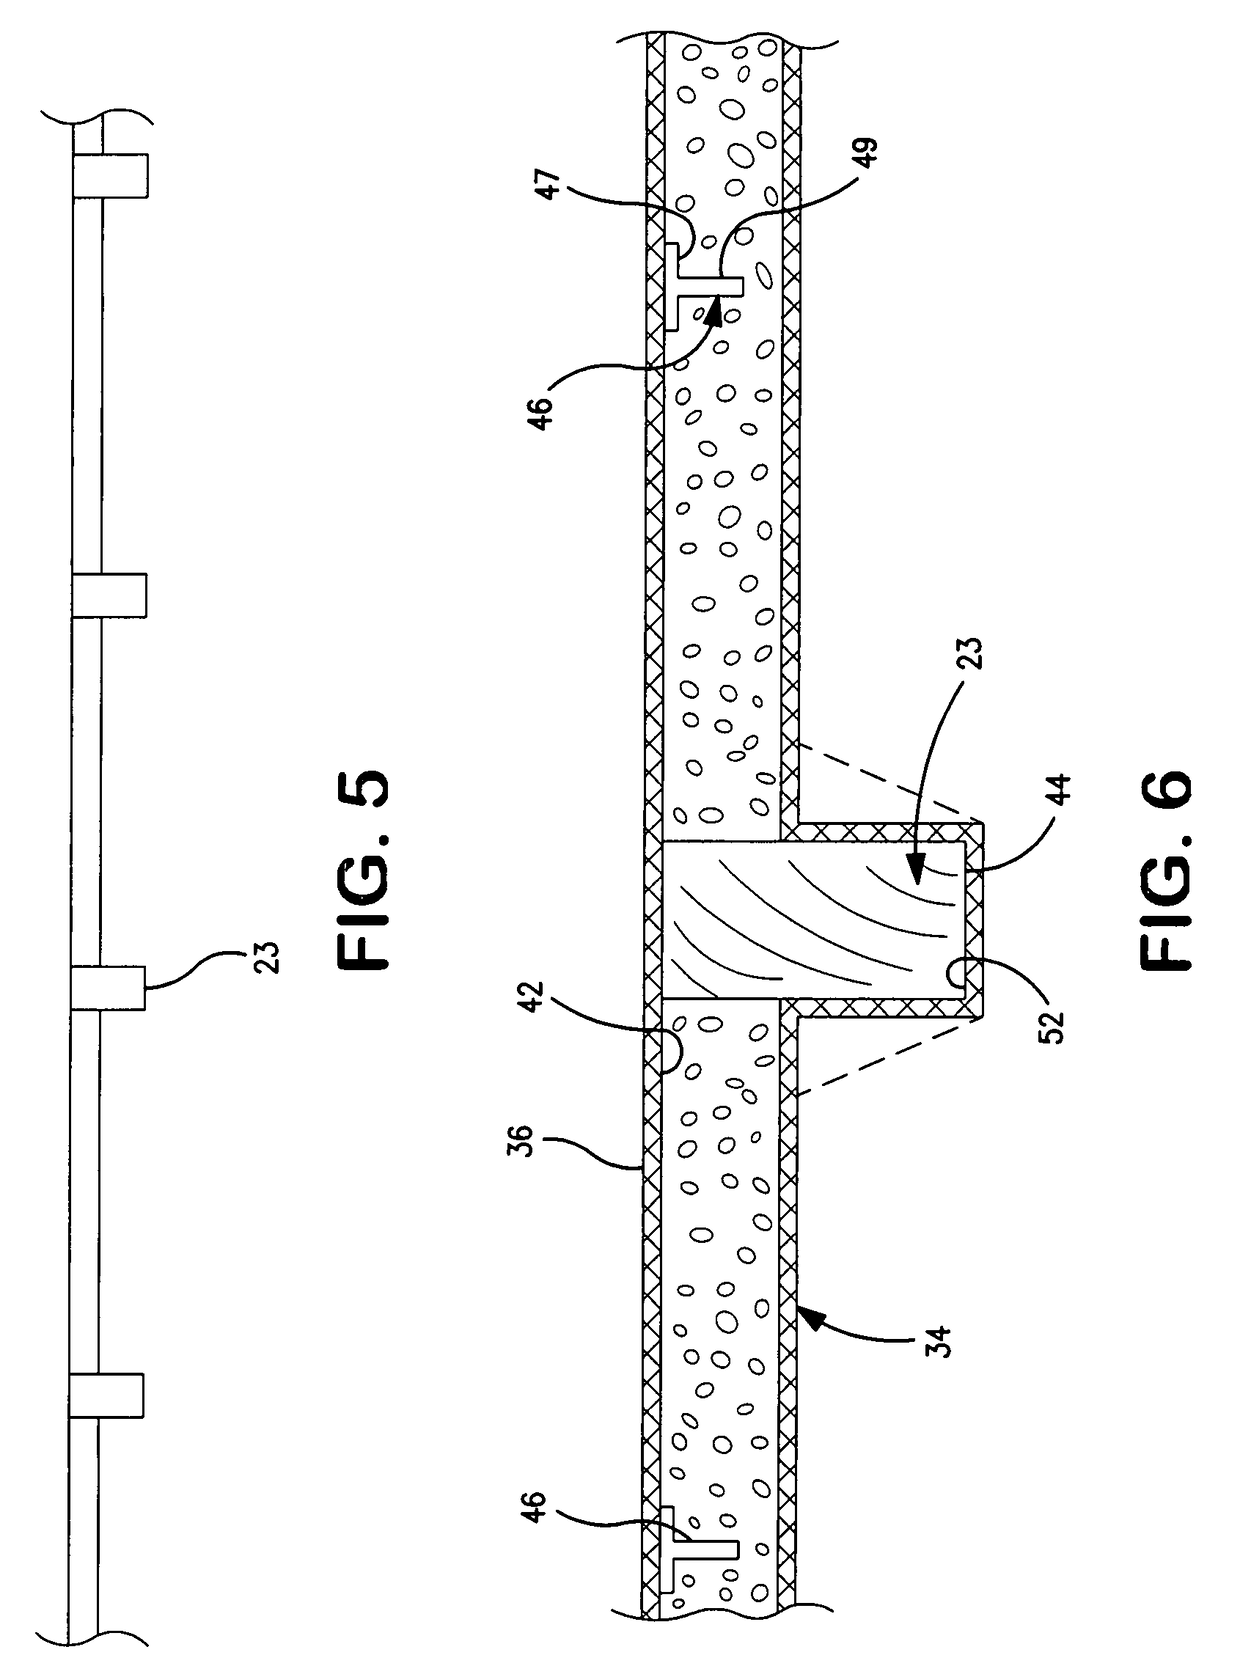 Support pads and support brackets, and structures supported thereby